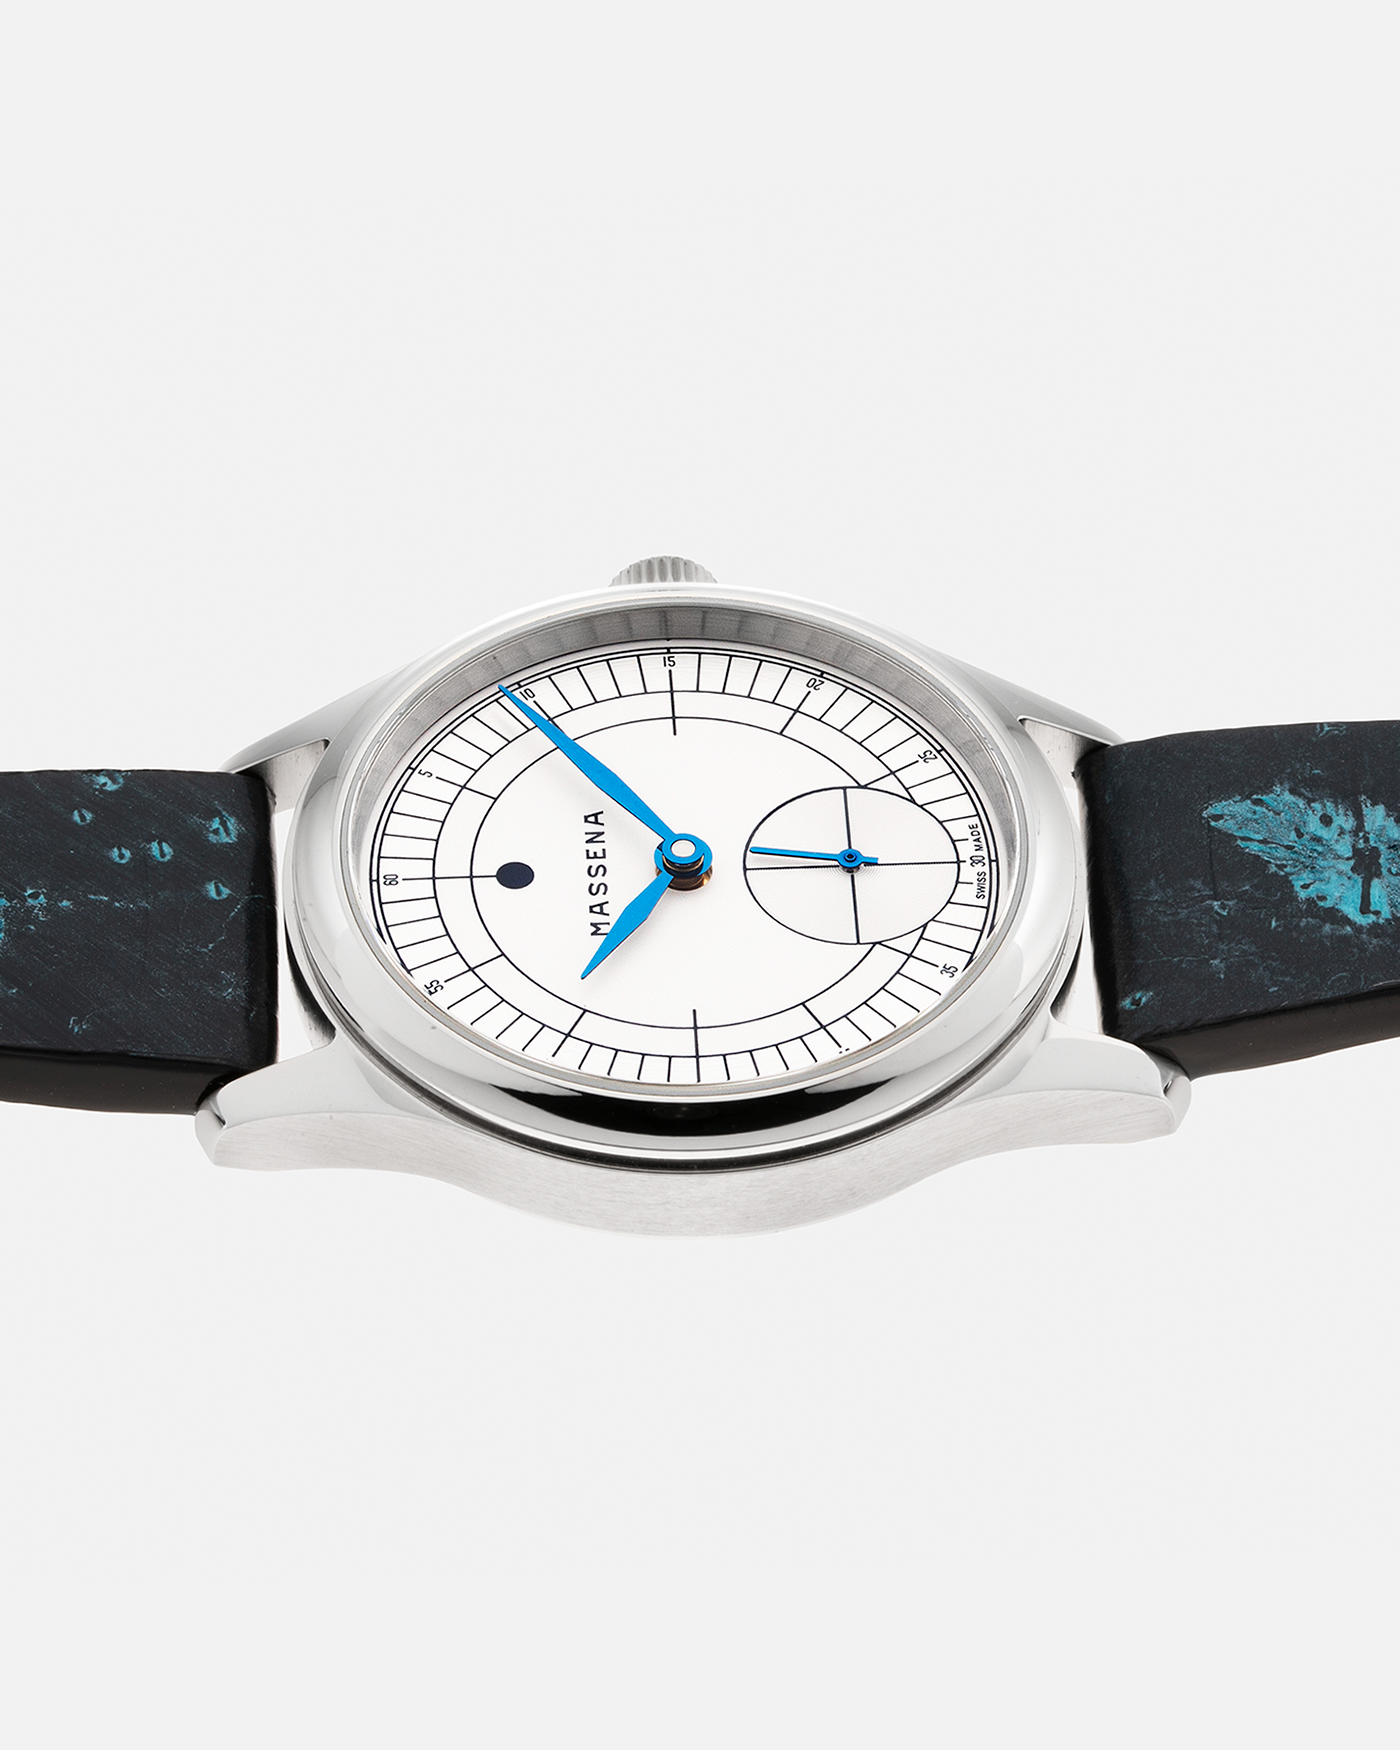 Brand: Massena LAB Year: 2023 Model: Massena LAB x Raúl Pagès Magraph, Limited Edition of 99 Pieces Material: Stainless Steel Movement: Massena LAB Cal. M660 Designed by Raúl Pagès, Manual-Winding Case Diameter: 38.5mm Lug Width: 20mm Strap: Jean Rosseau Paris Sustainable Sturgeon Skin Strap with Stainless Steel Tang Buckle, additional Black Textured Calf Leather Strap.